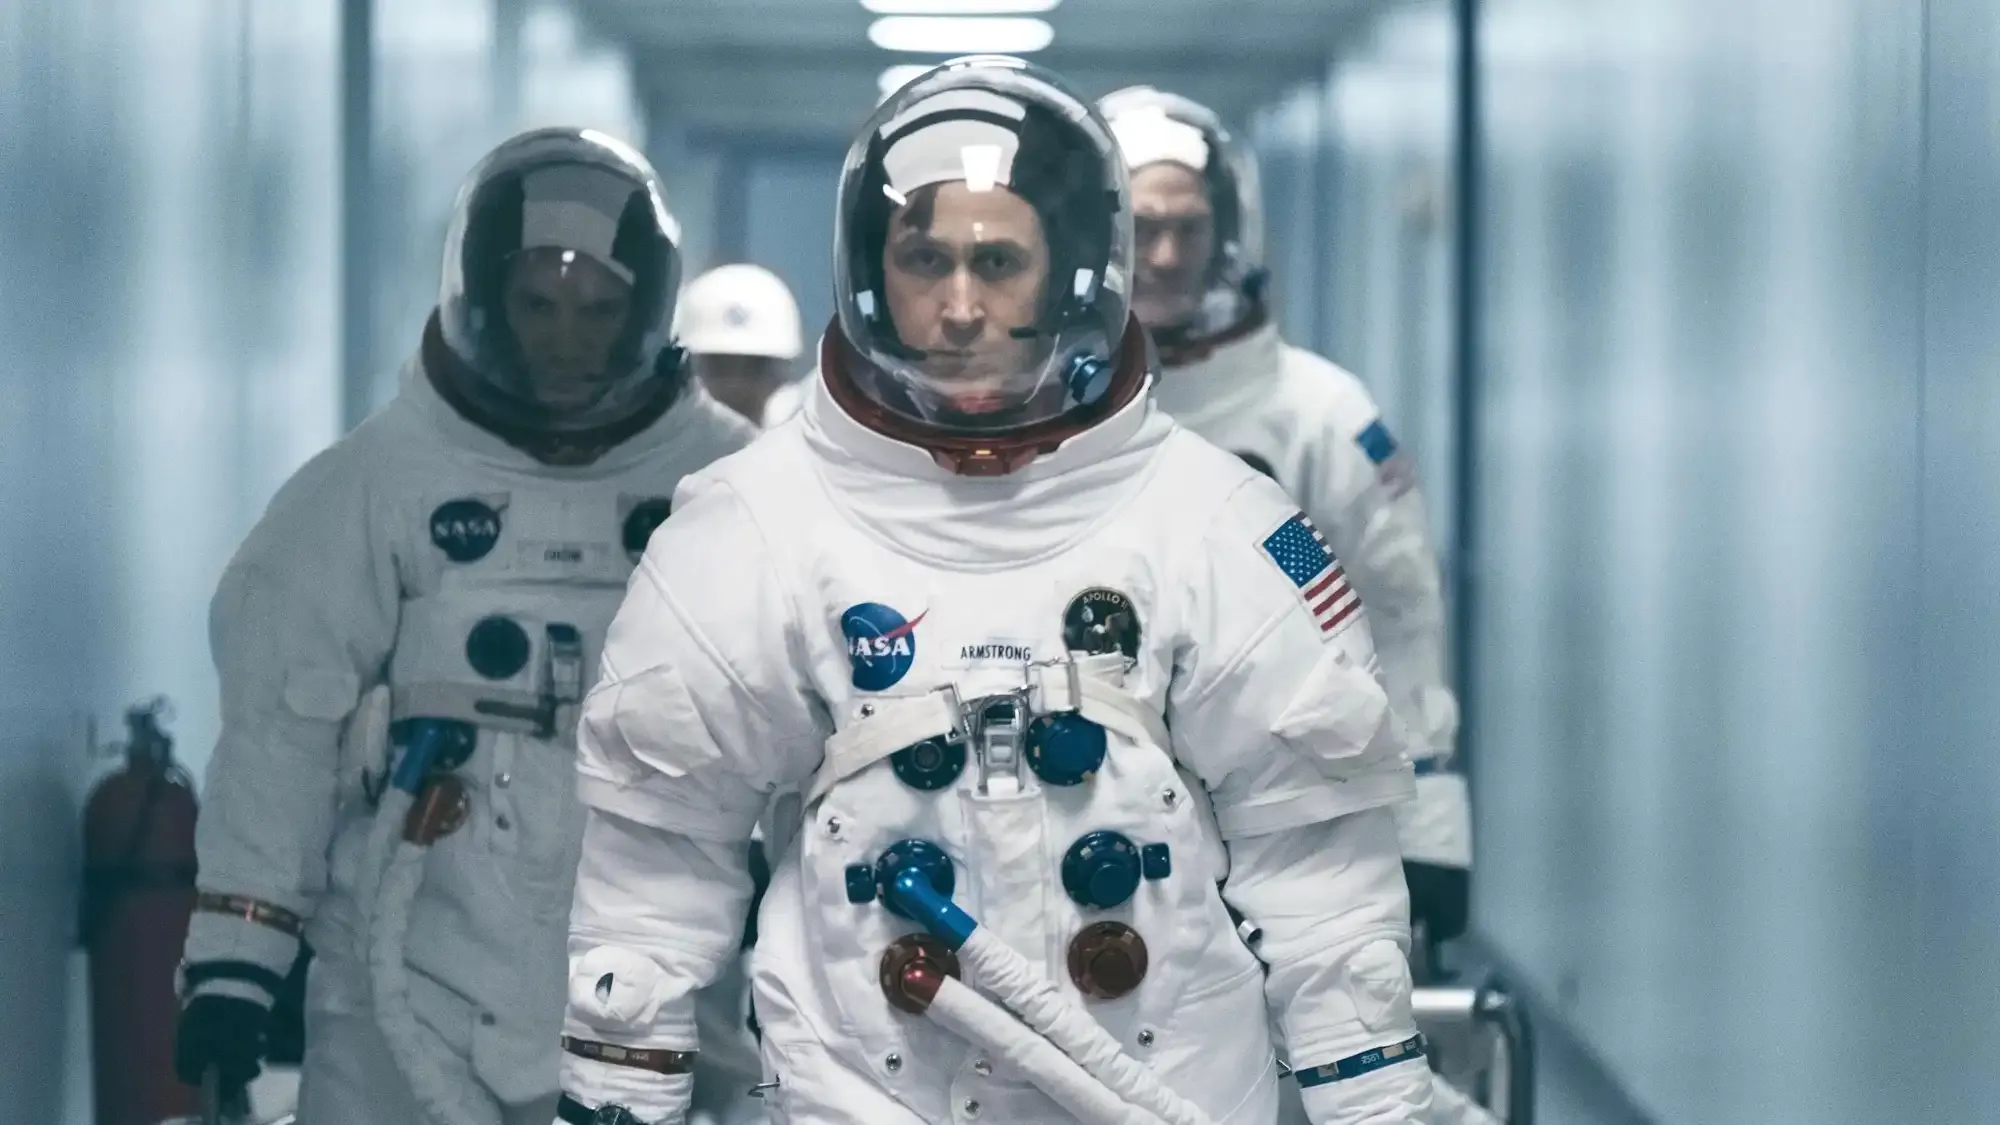 First Man movie review